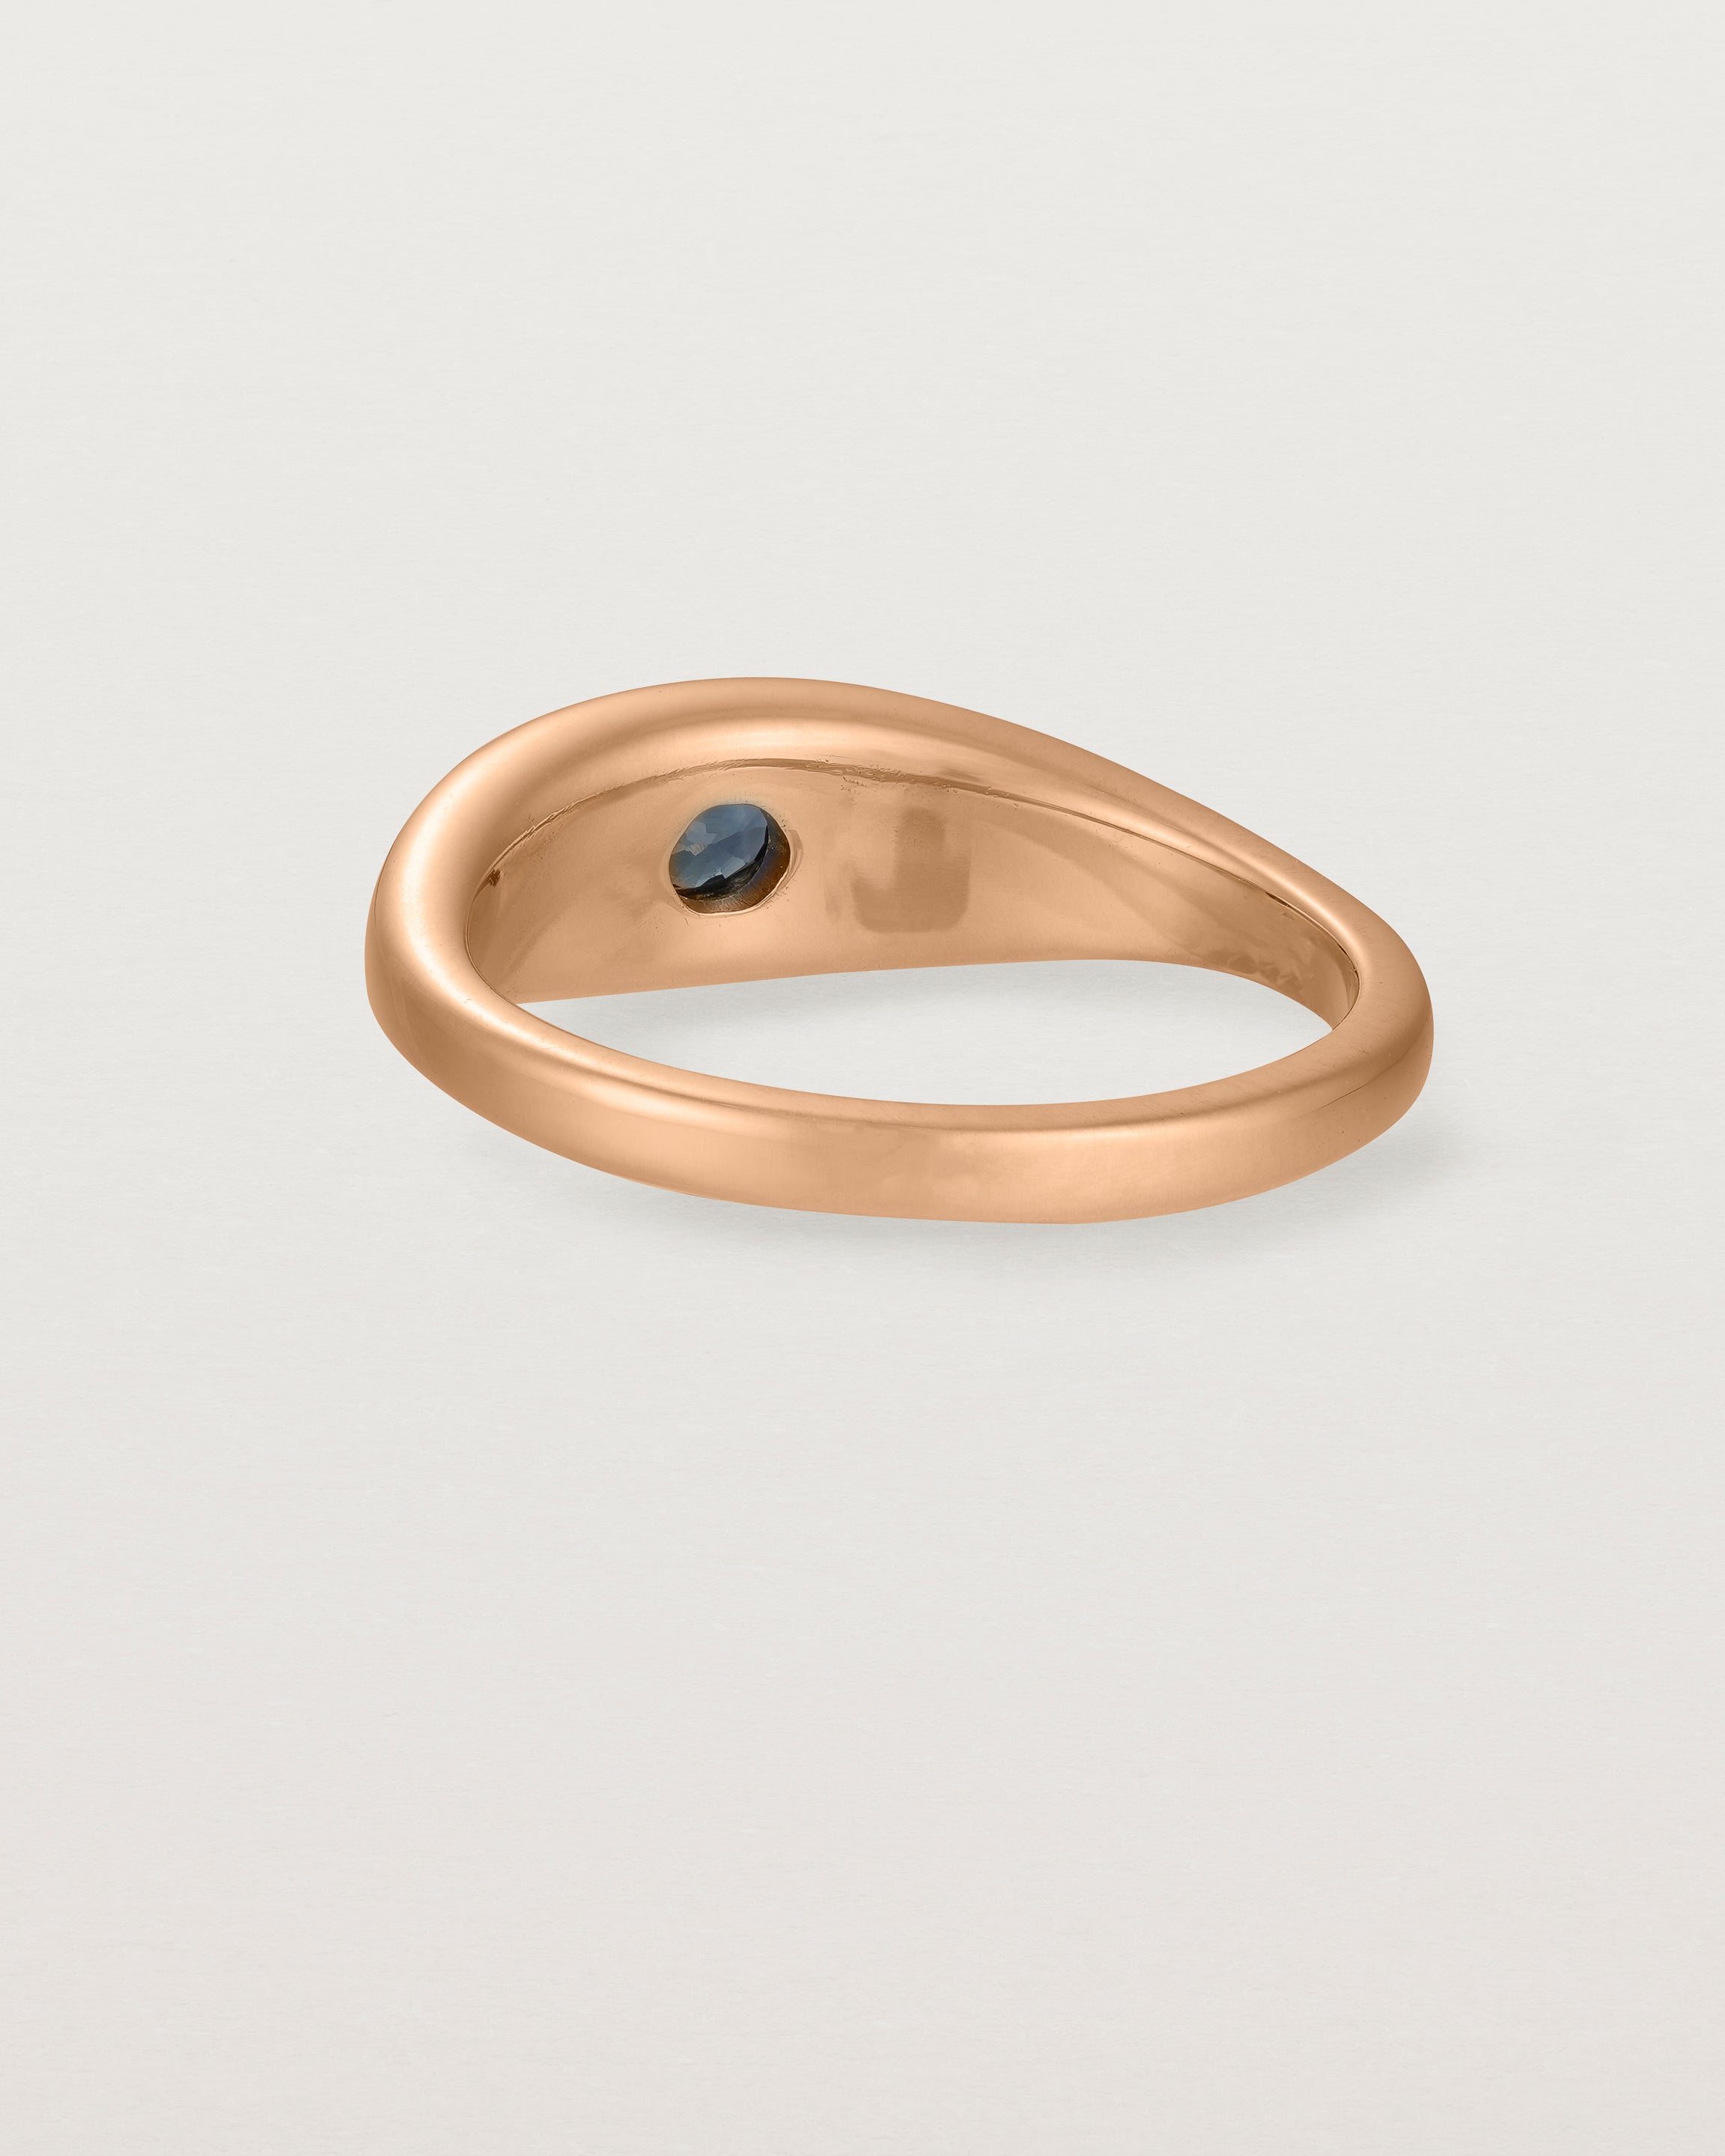 Back view of the Seule Single Ring | Australian Sapphire | Rose Gold.